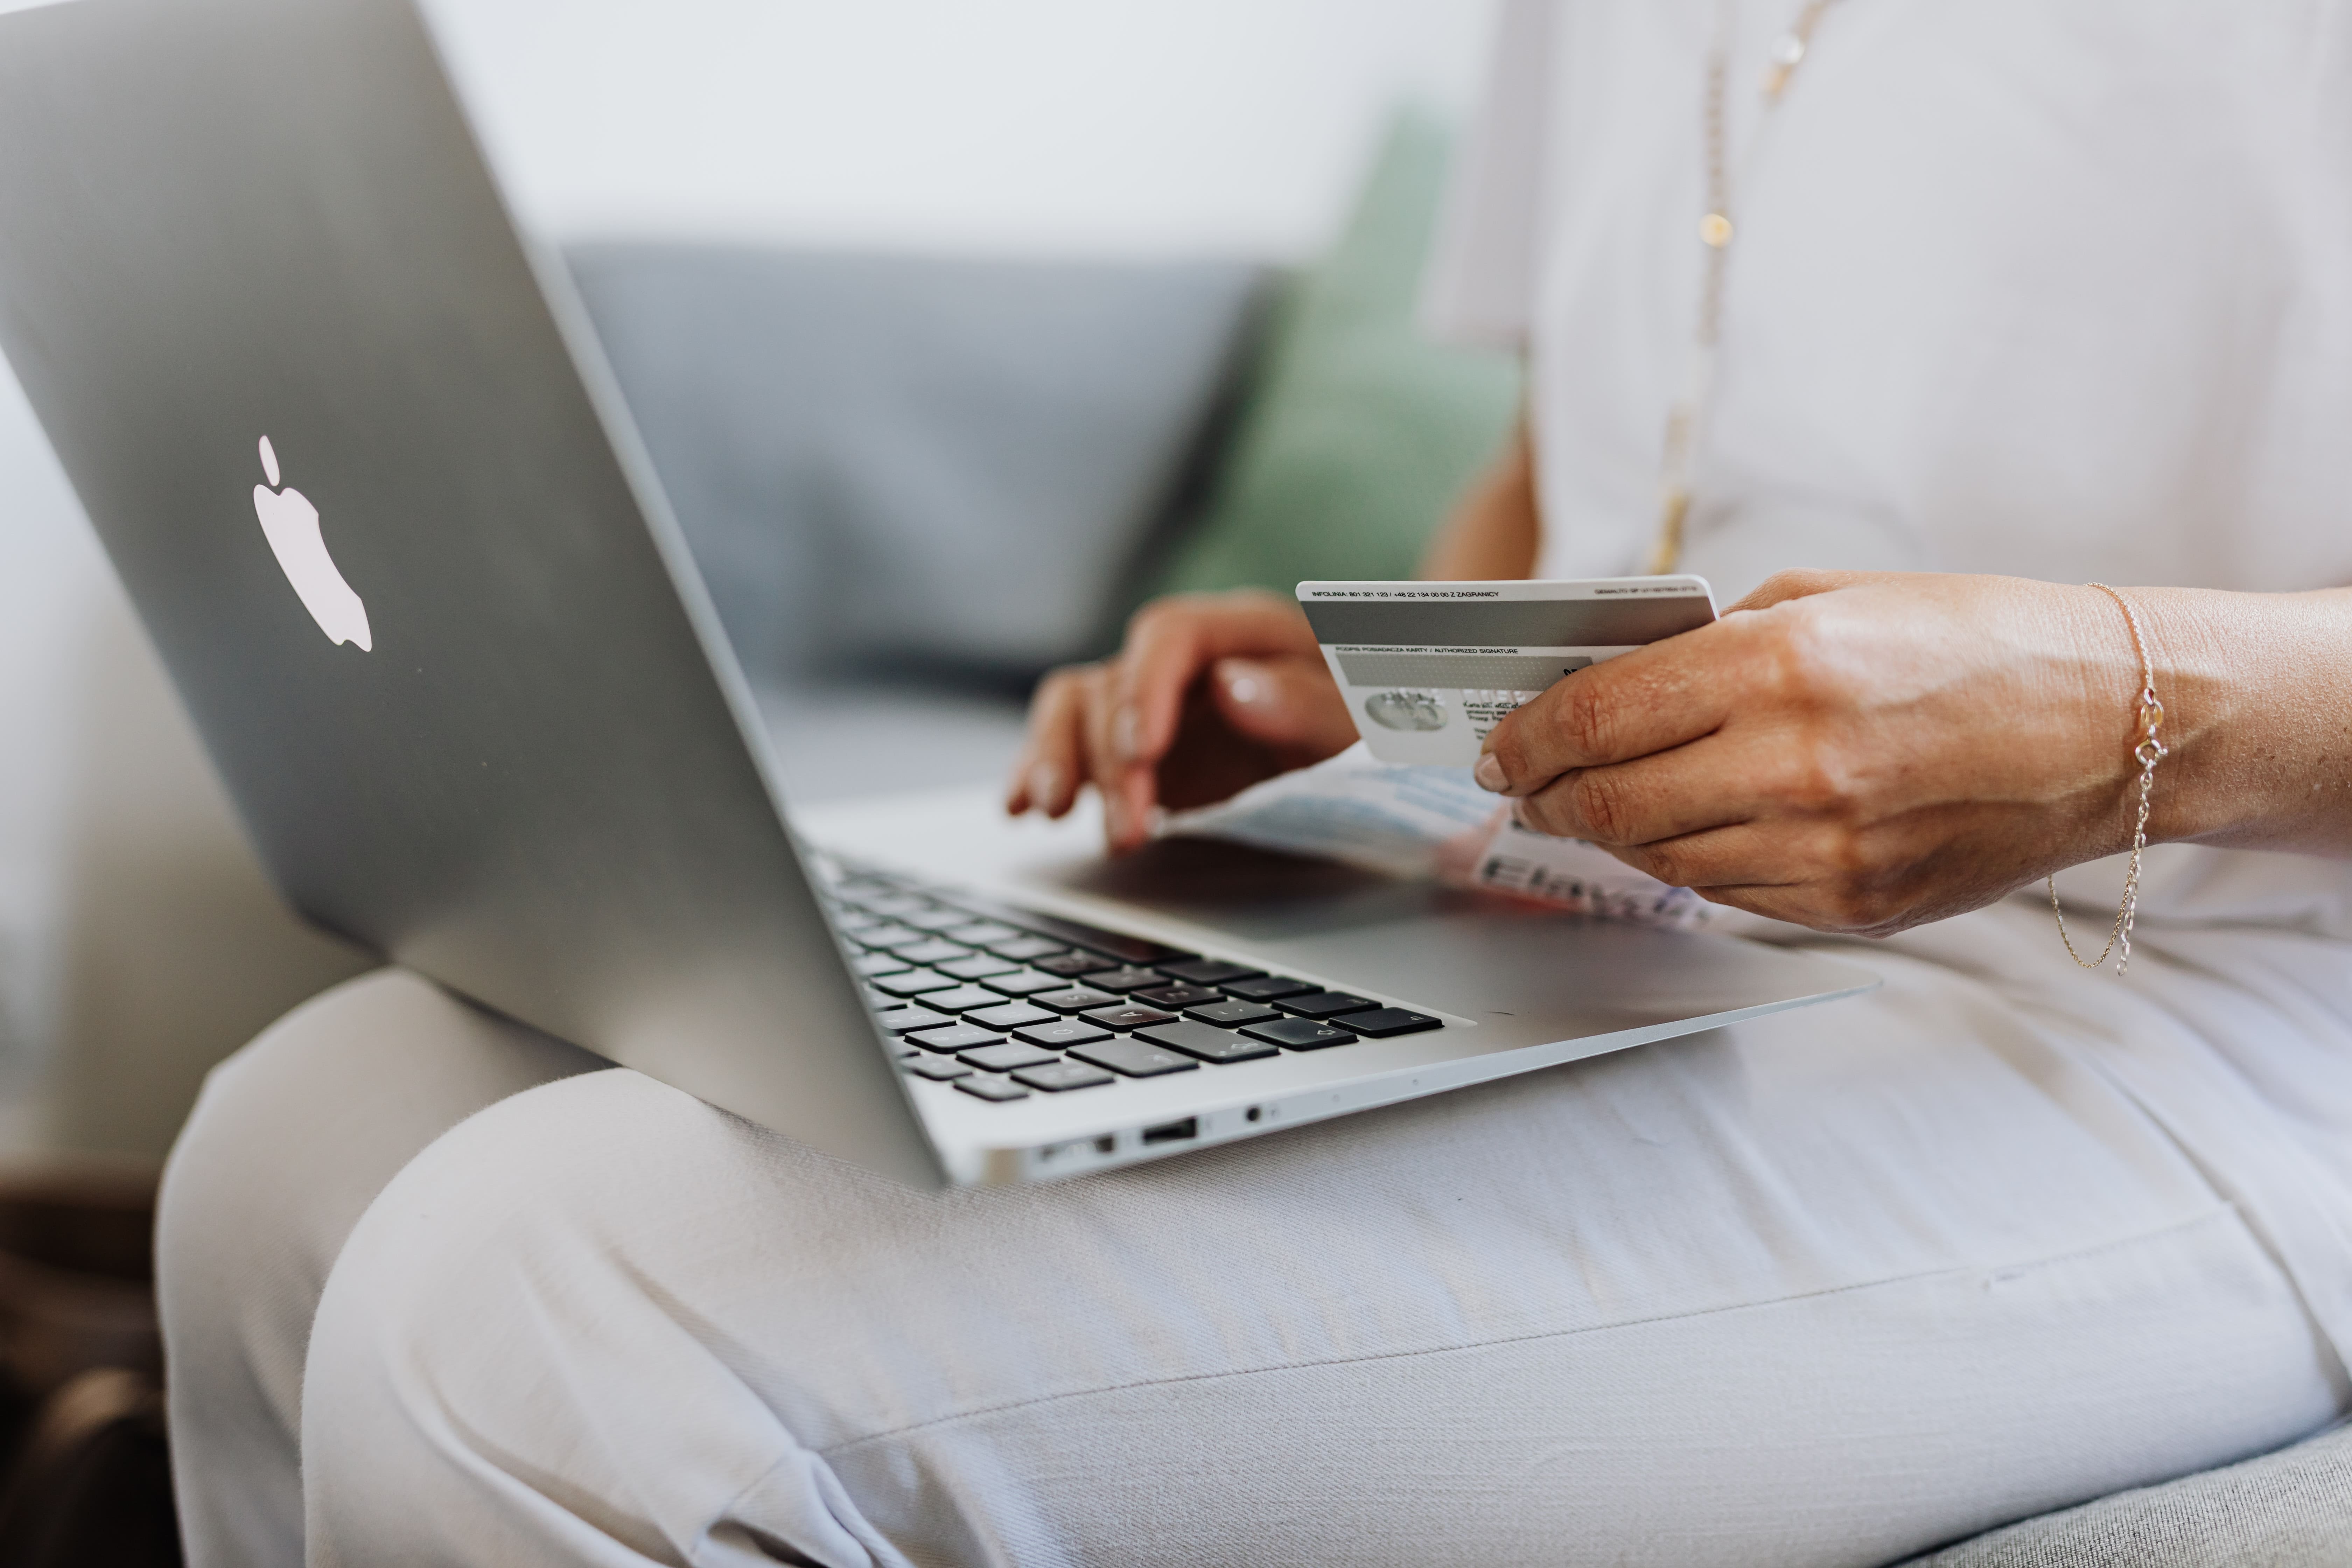 Woman online shopping on laptop with credit card out